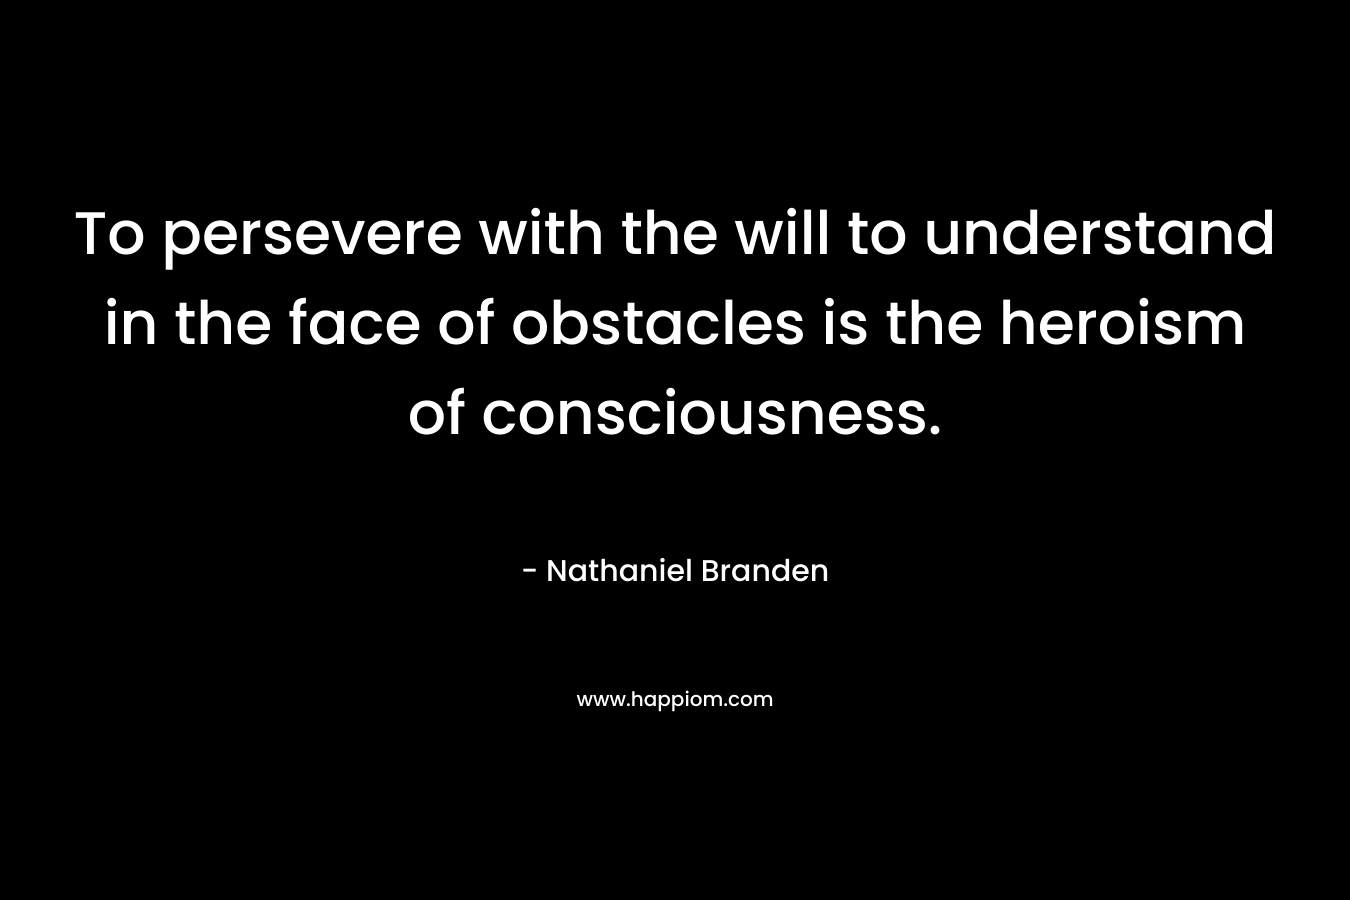 To persevere with the will to understand in the face of obstacles is the heroism of consciousness.